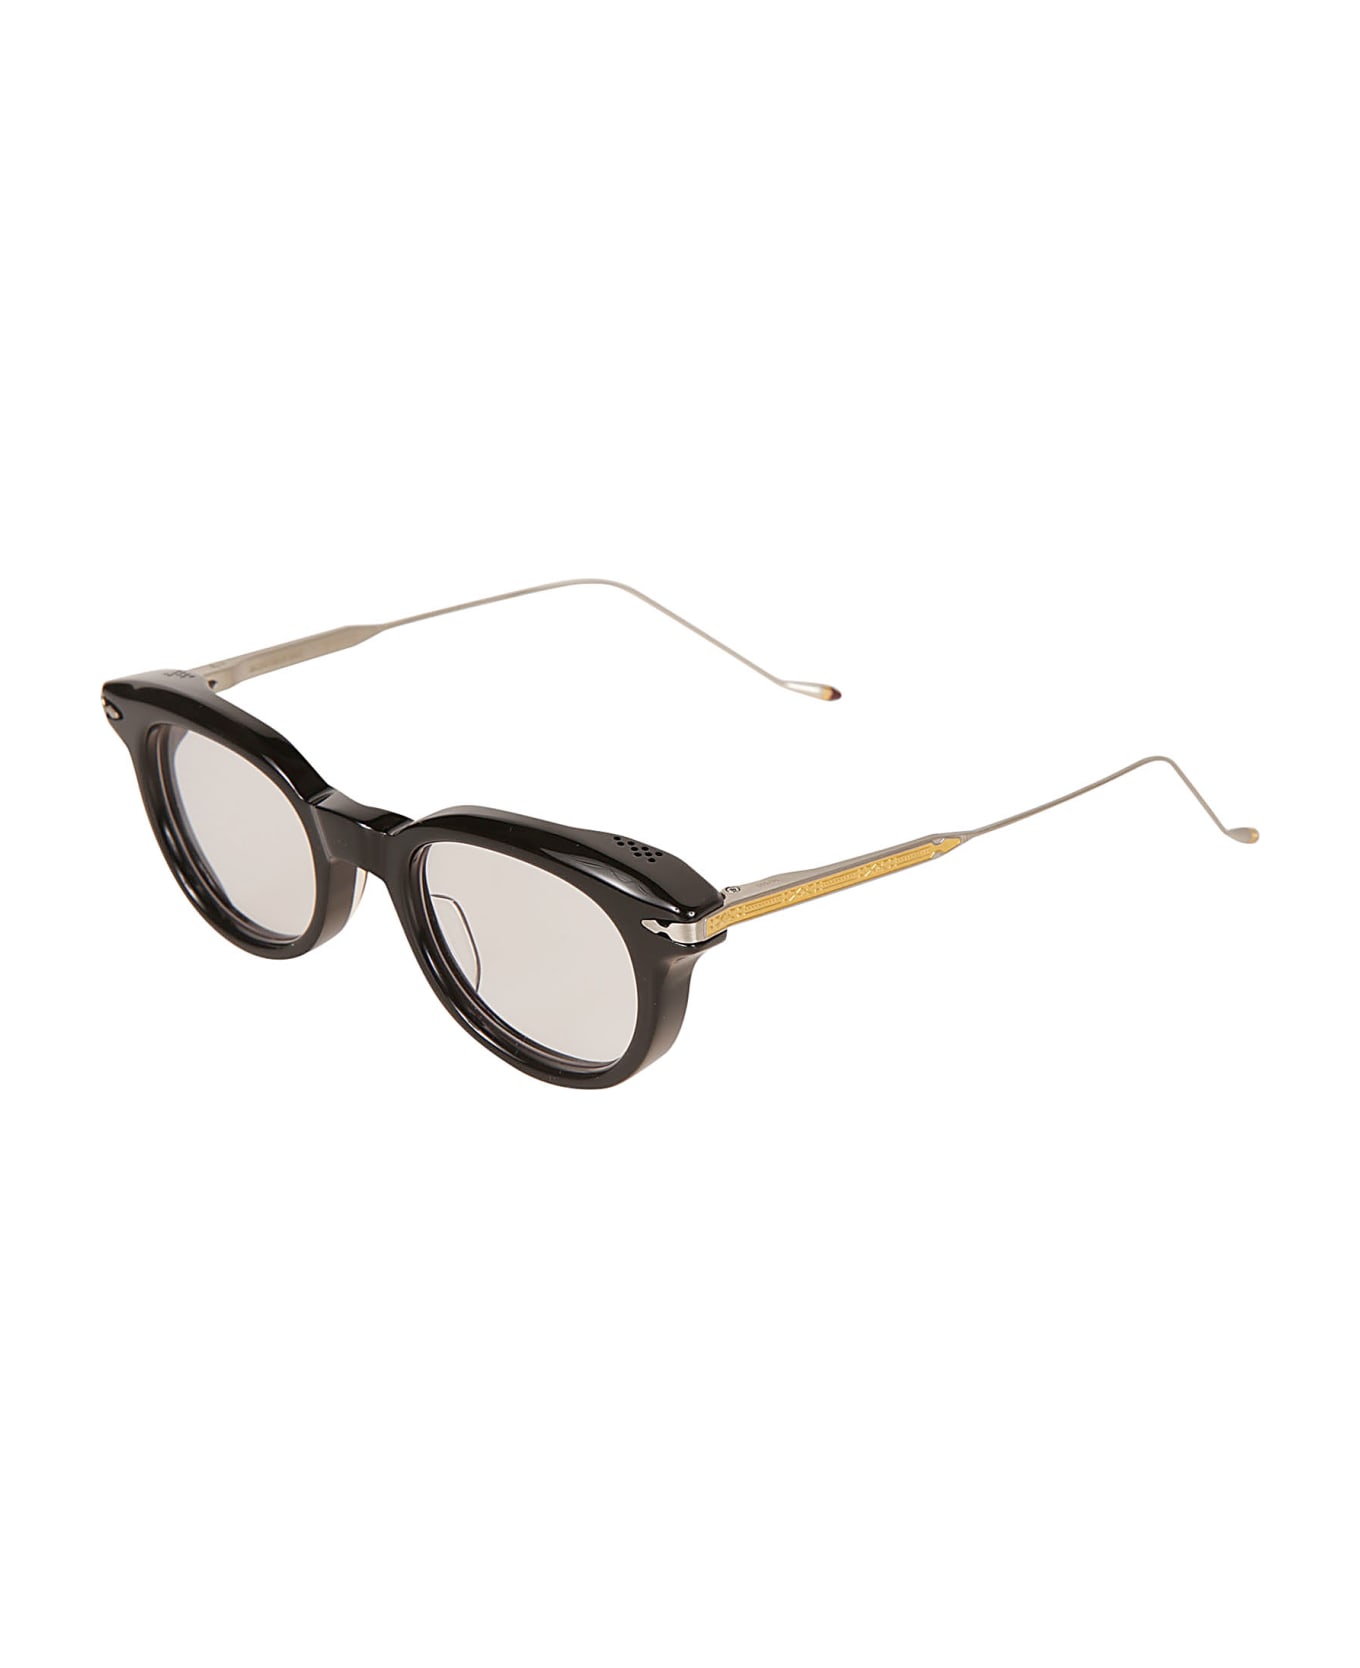 Jacques Marie Mage Hisao Frame - noir